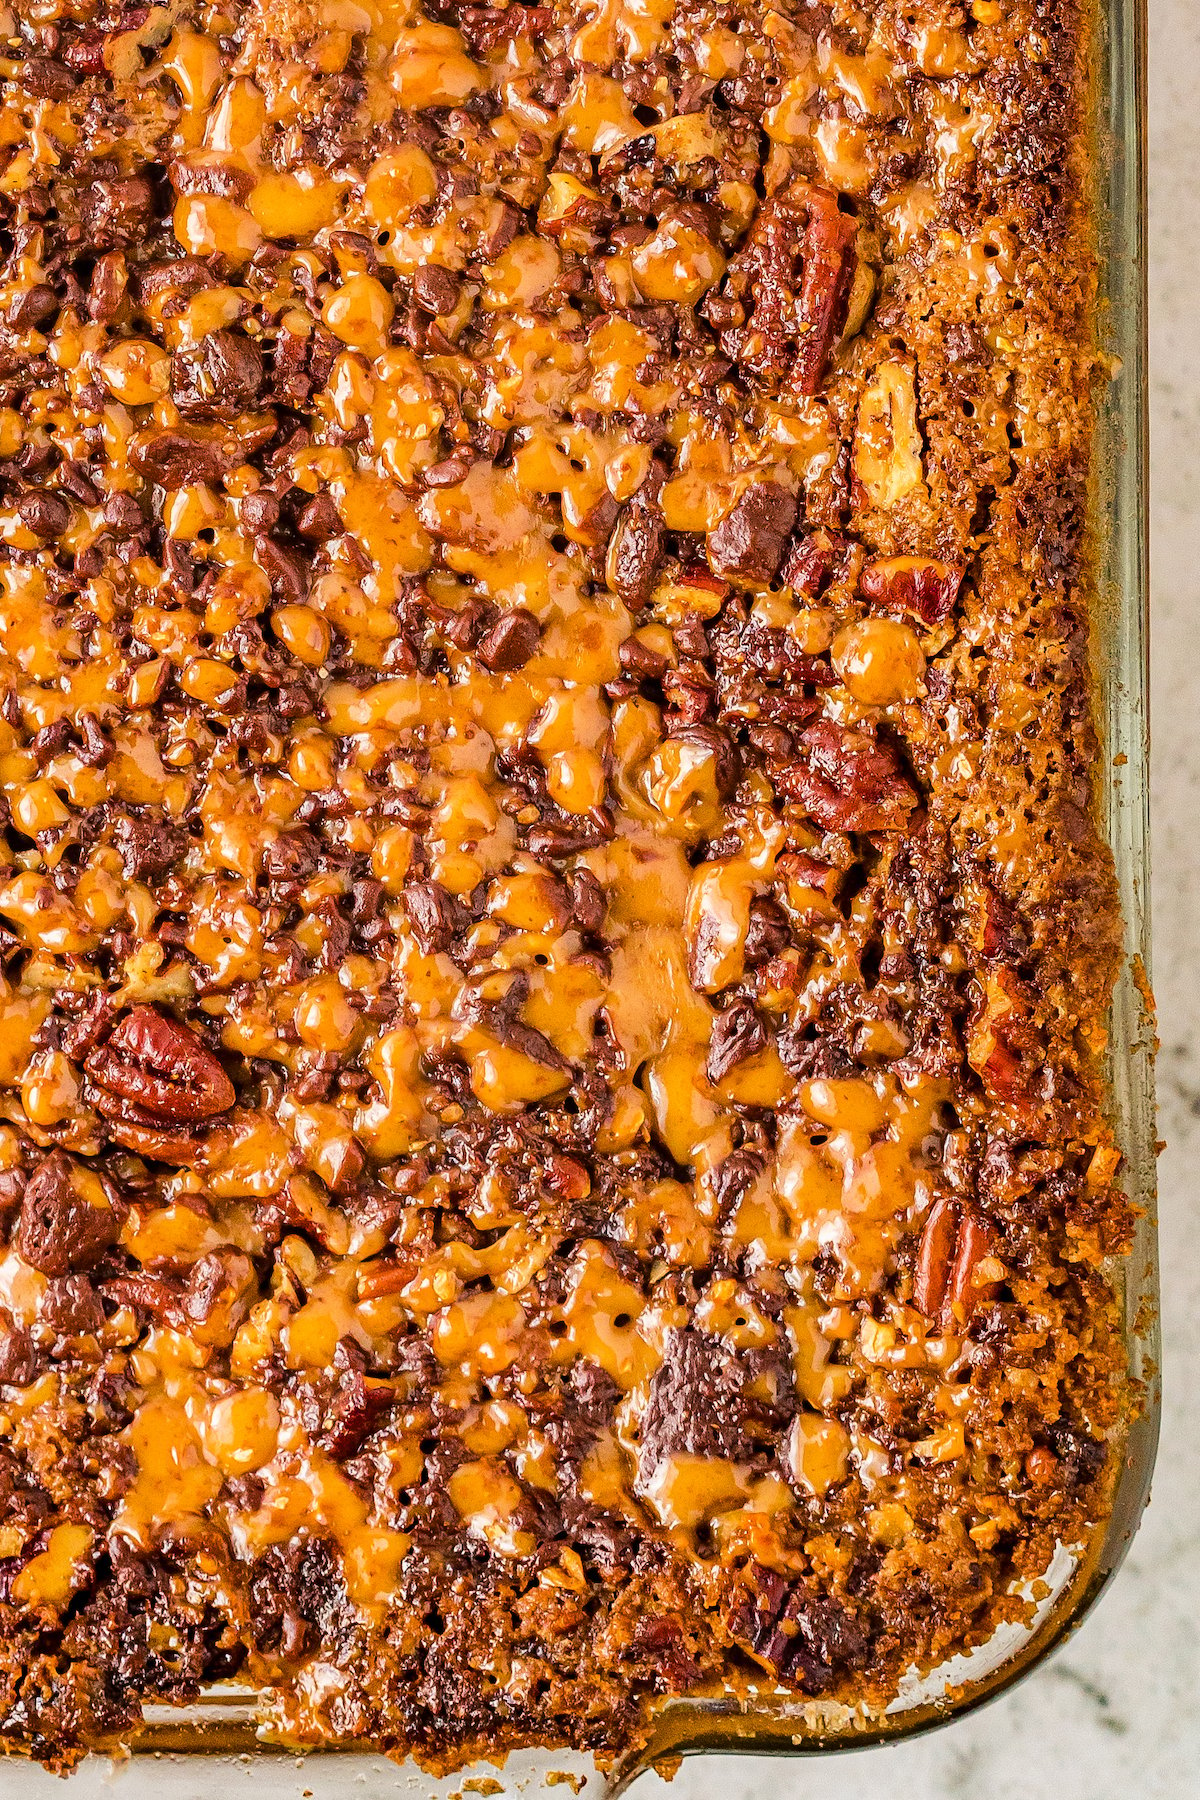 Close-up shot of dump cake topped with nuts and toffee.